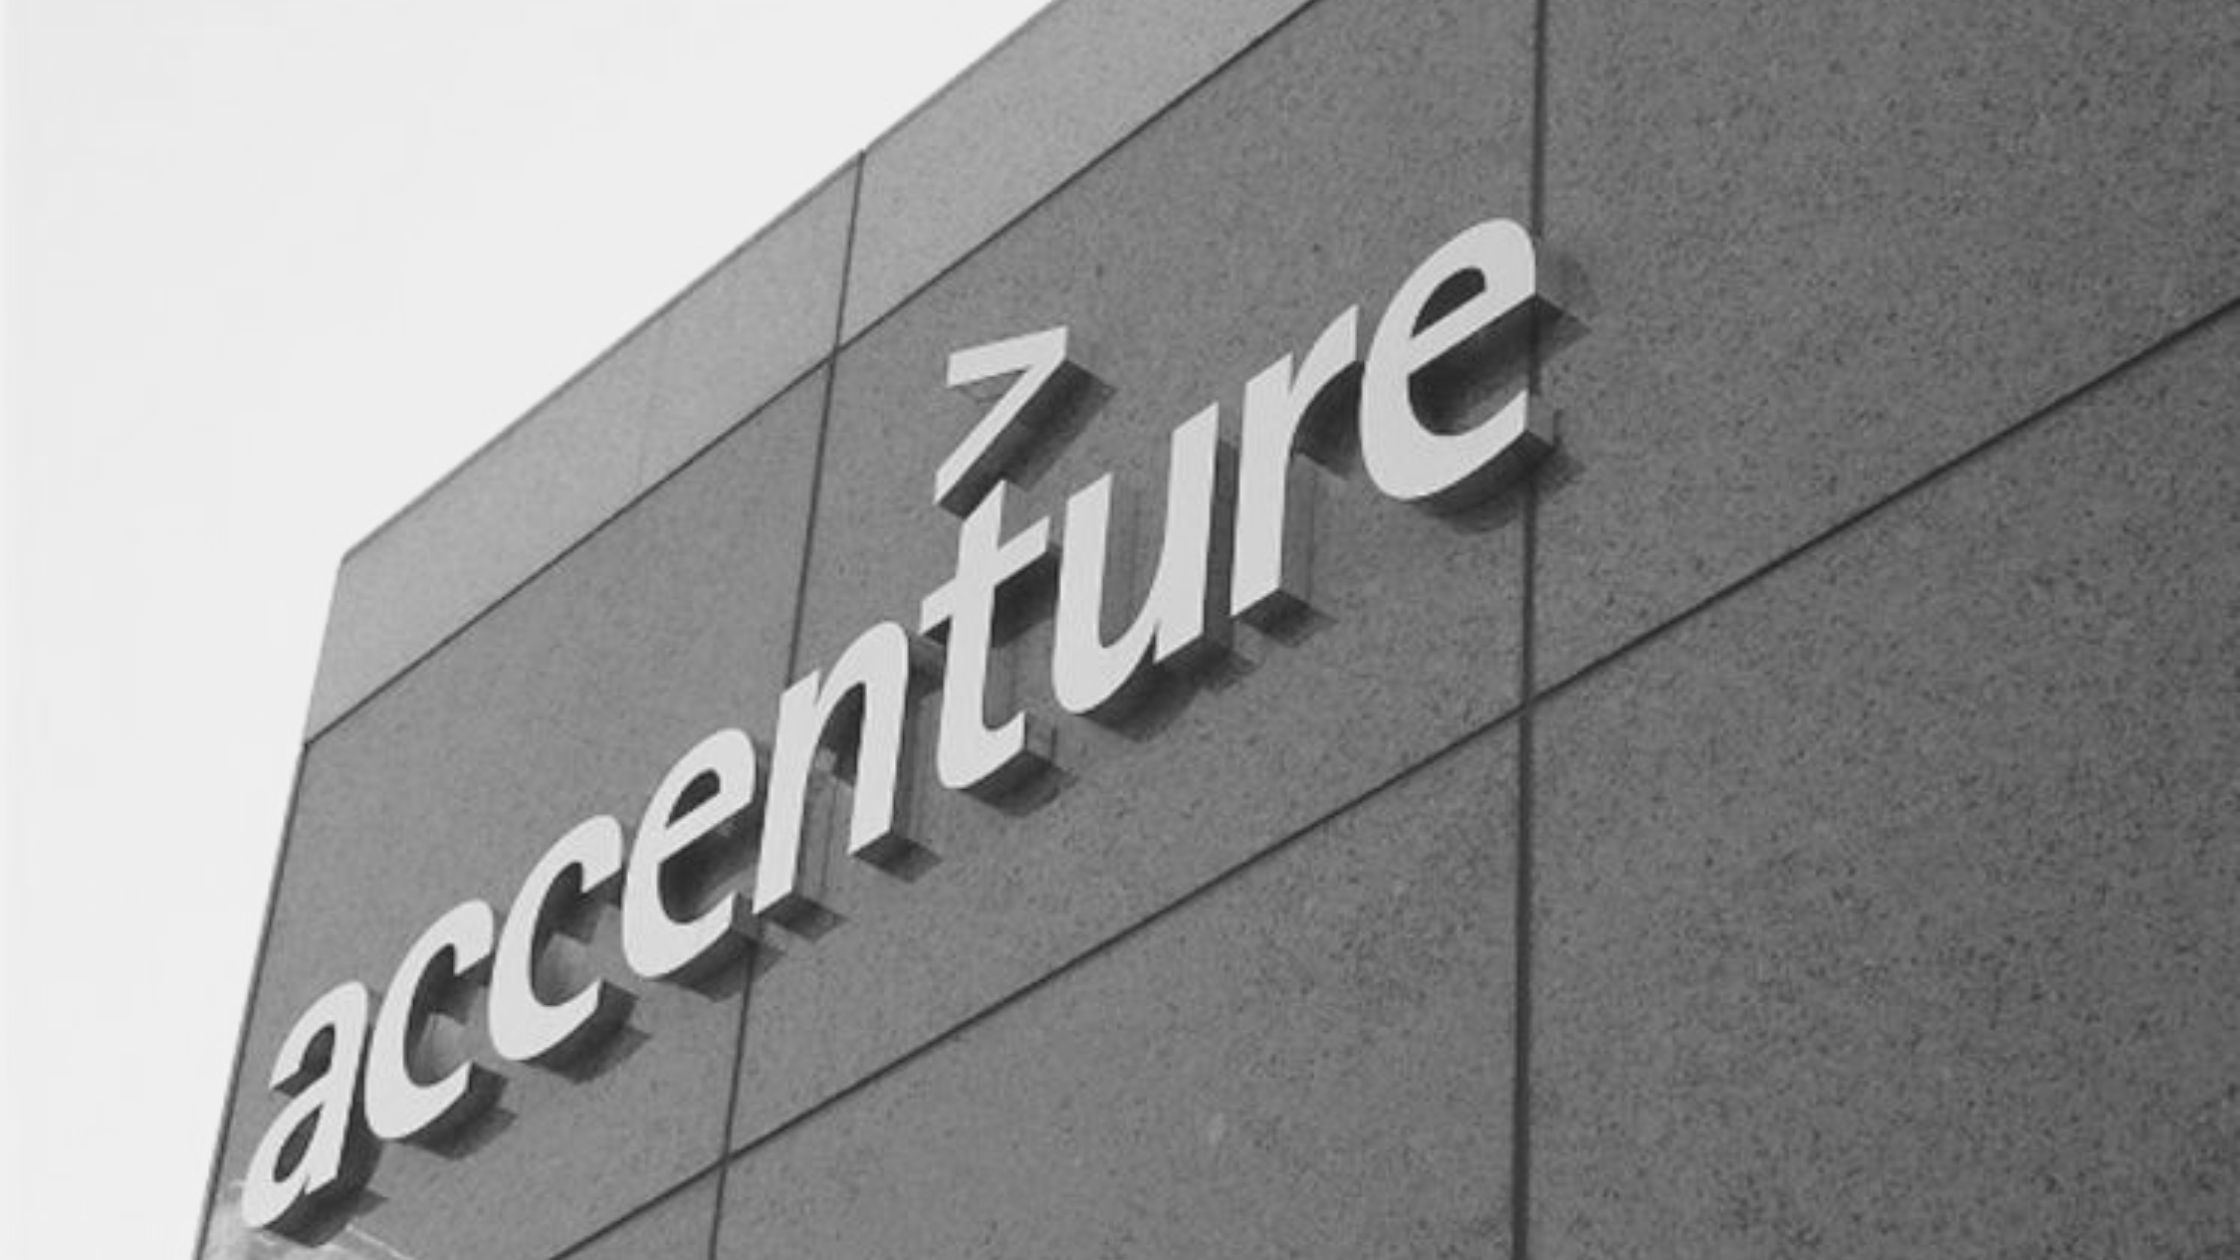 Accenture and AWS to Offer Free Cloud Computing Course in India